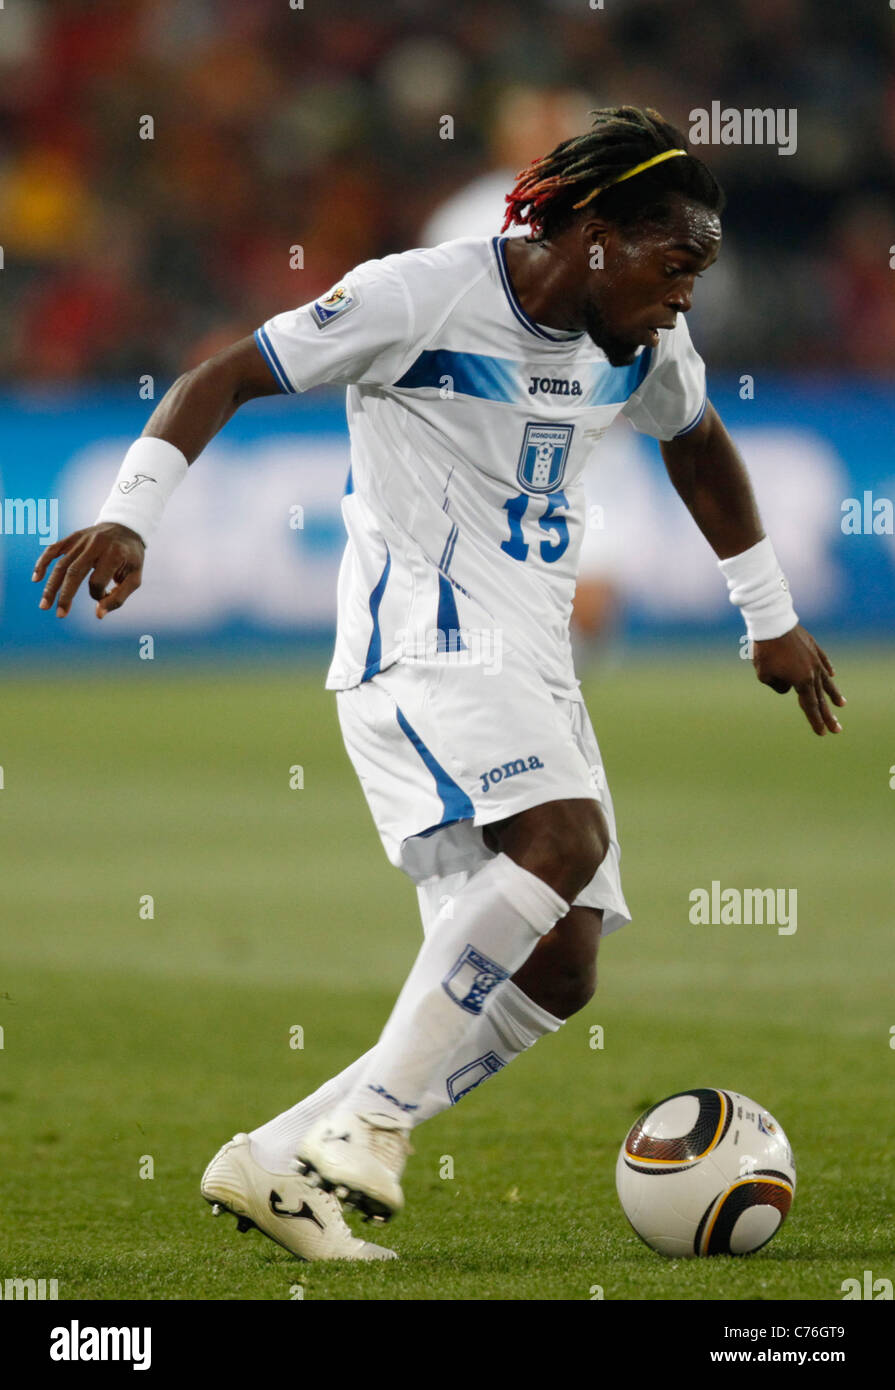 Walter Martinez of Honduras in action during a FIFA World Cup match against Spain June 21, 2010 at Ellis Park Stadium. Stock Photo